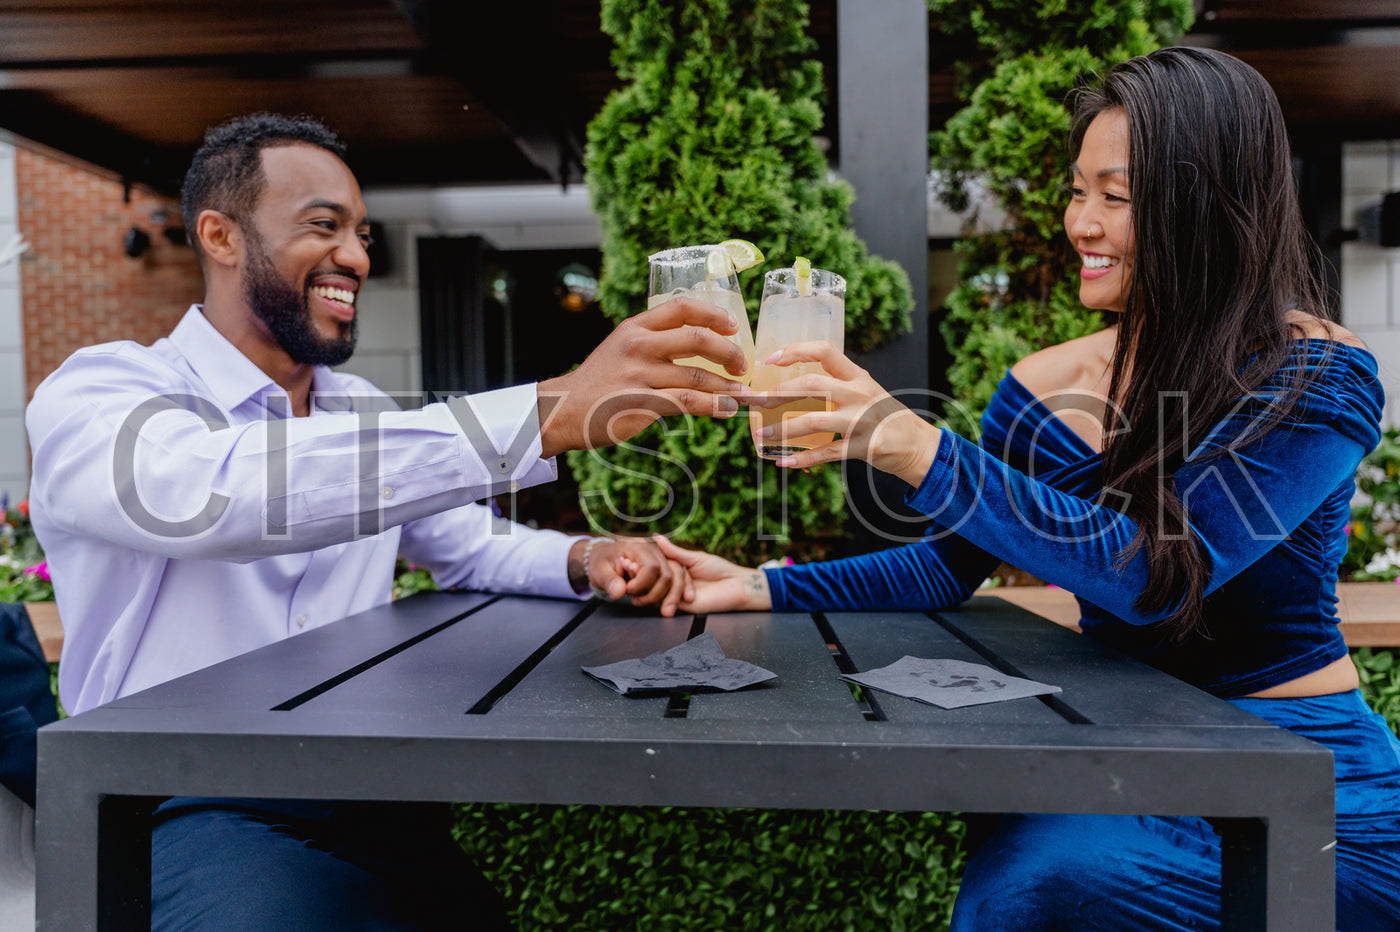 Cheerful couple clinking glasses in Greenville, SC outdoor setting